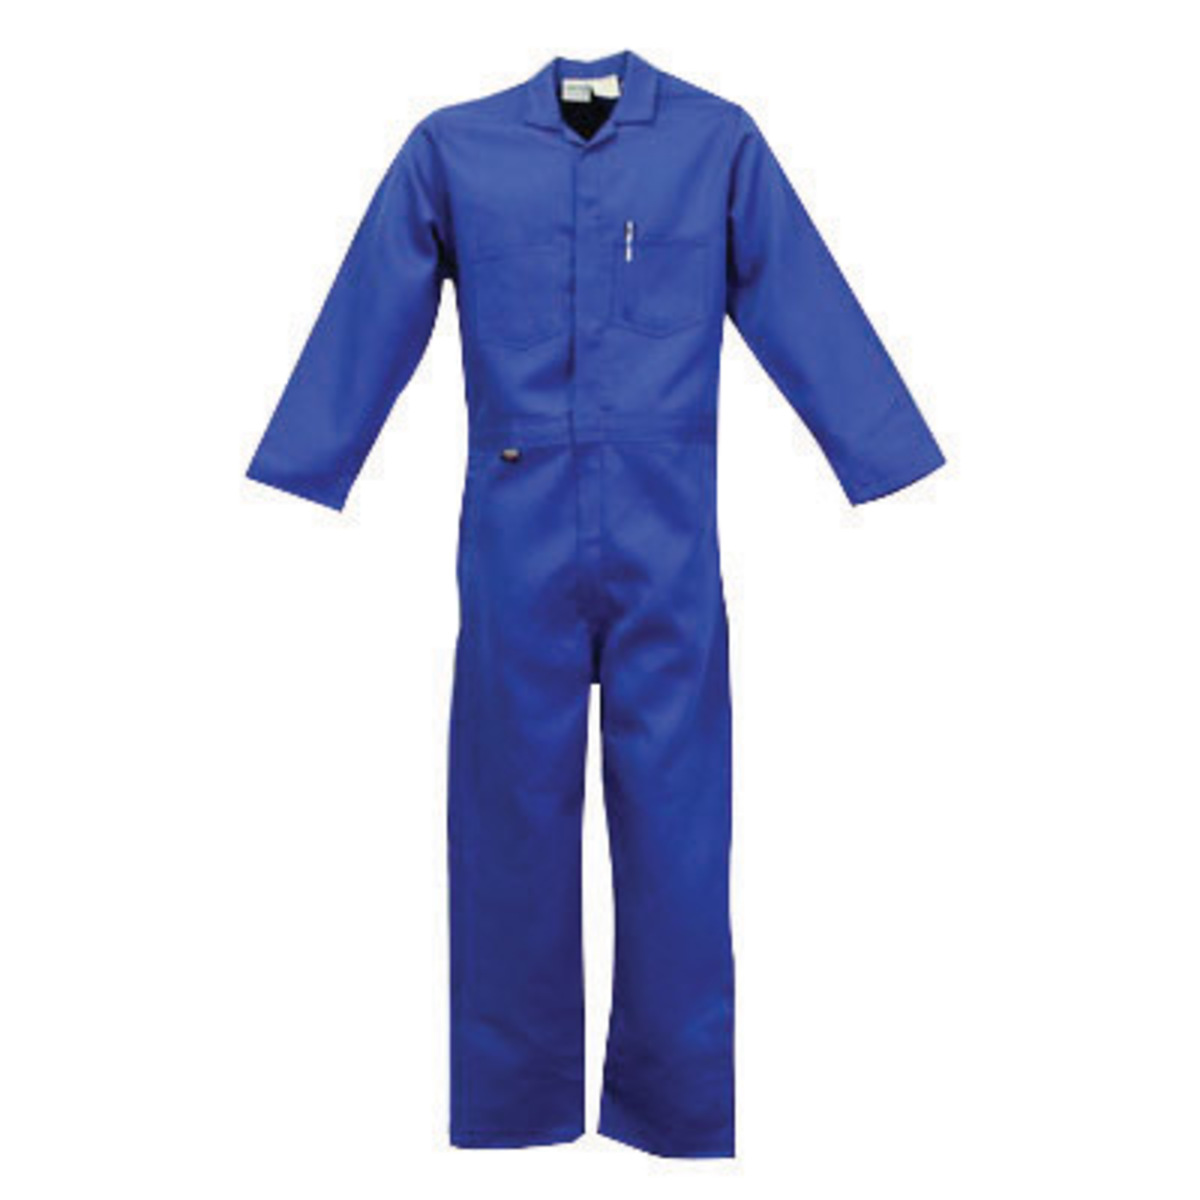 Stanco Safety Products™ Size 5X Royal Blue Indura® UltraSoft® Arc Rated Flame Resistant Coveralls With Front Zipper Closure